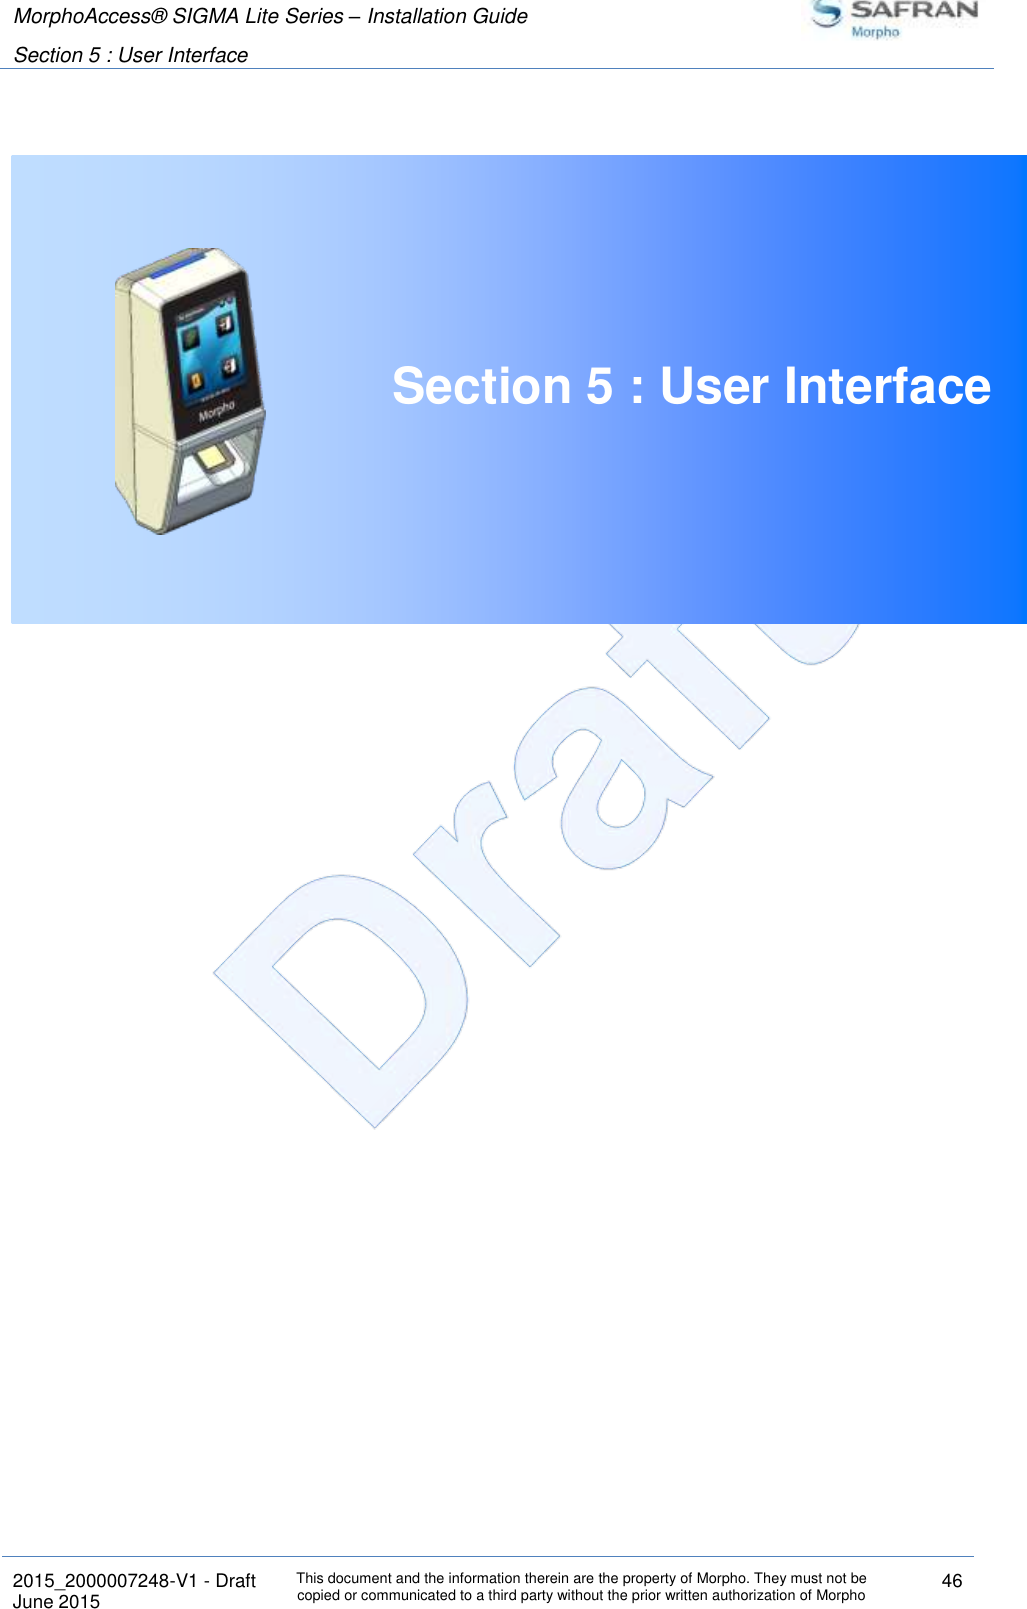 MorphoAccess® SIGMA Lite Series – Installation Guide  Section 5 : User Interface   2015_2000007248-V1 - Draft This document and the information therein are the property of Morpho. They must not be copied or communicated to a third party without the prior written authorization of Morpho 46 June 2015    Section 5 : User Interface     